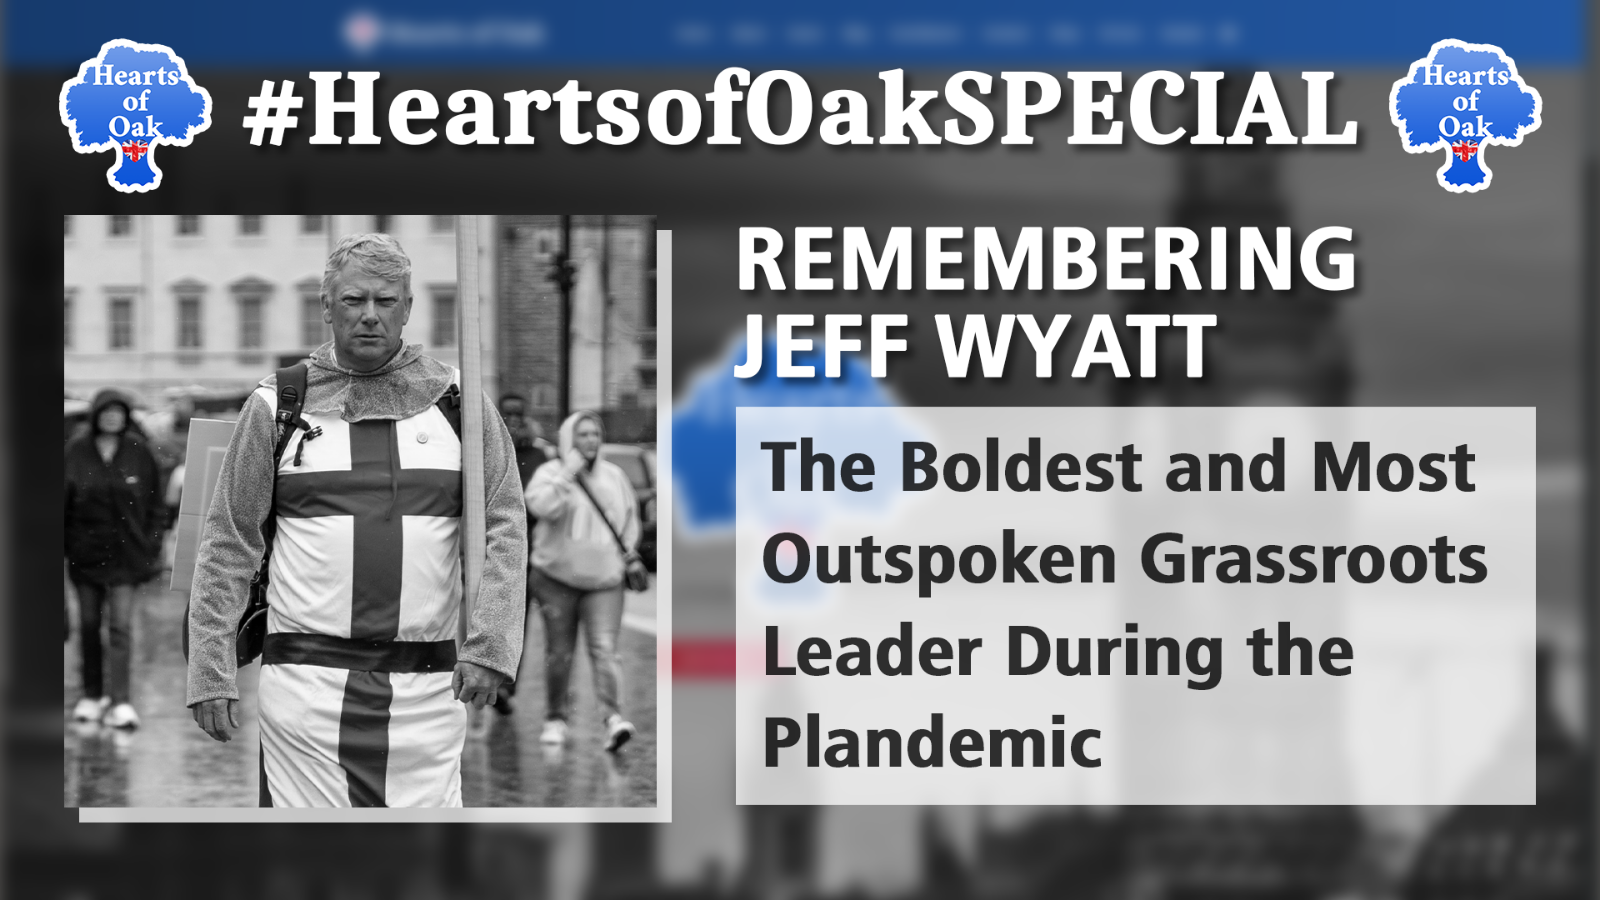 Remembering Jeff Wyatt - The Boldest and Most Outspoken Grassroots Leader During the Plandemic